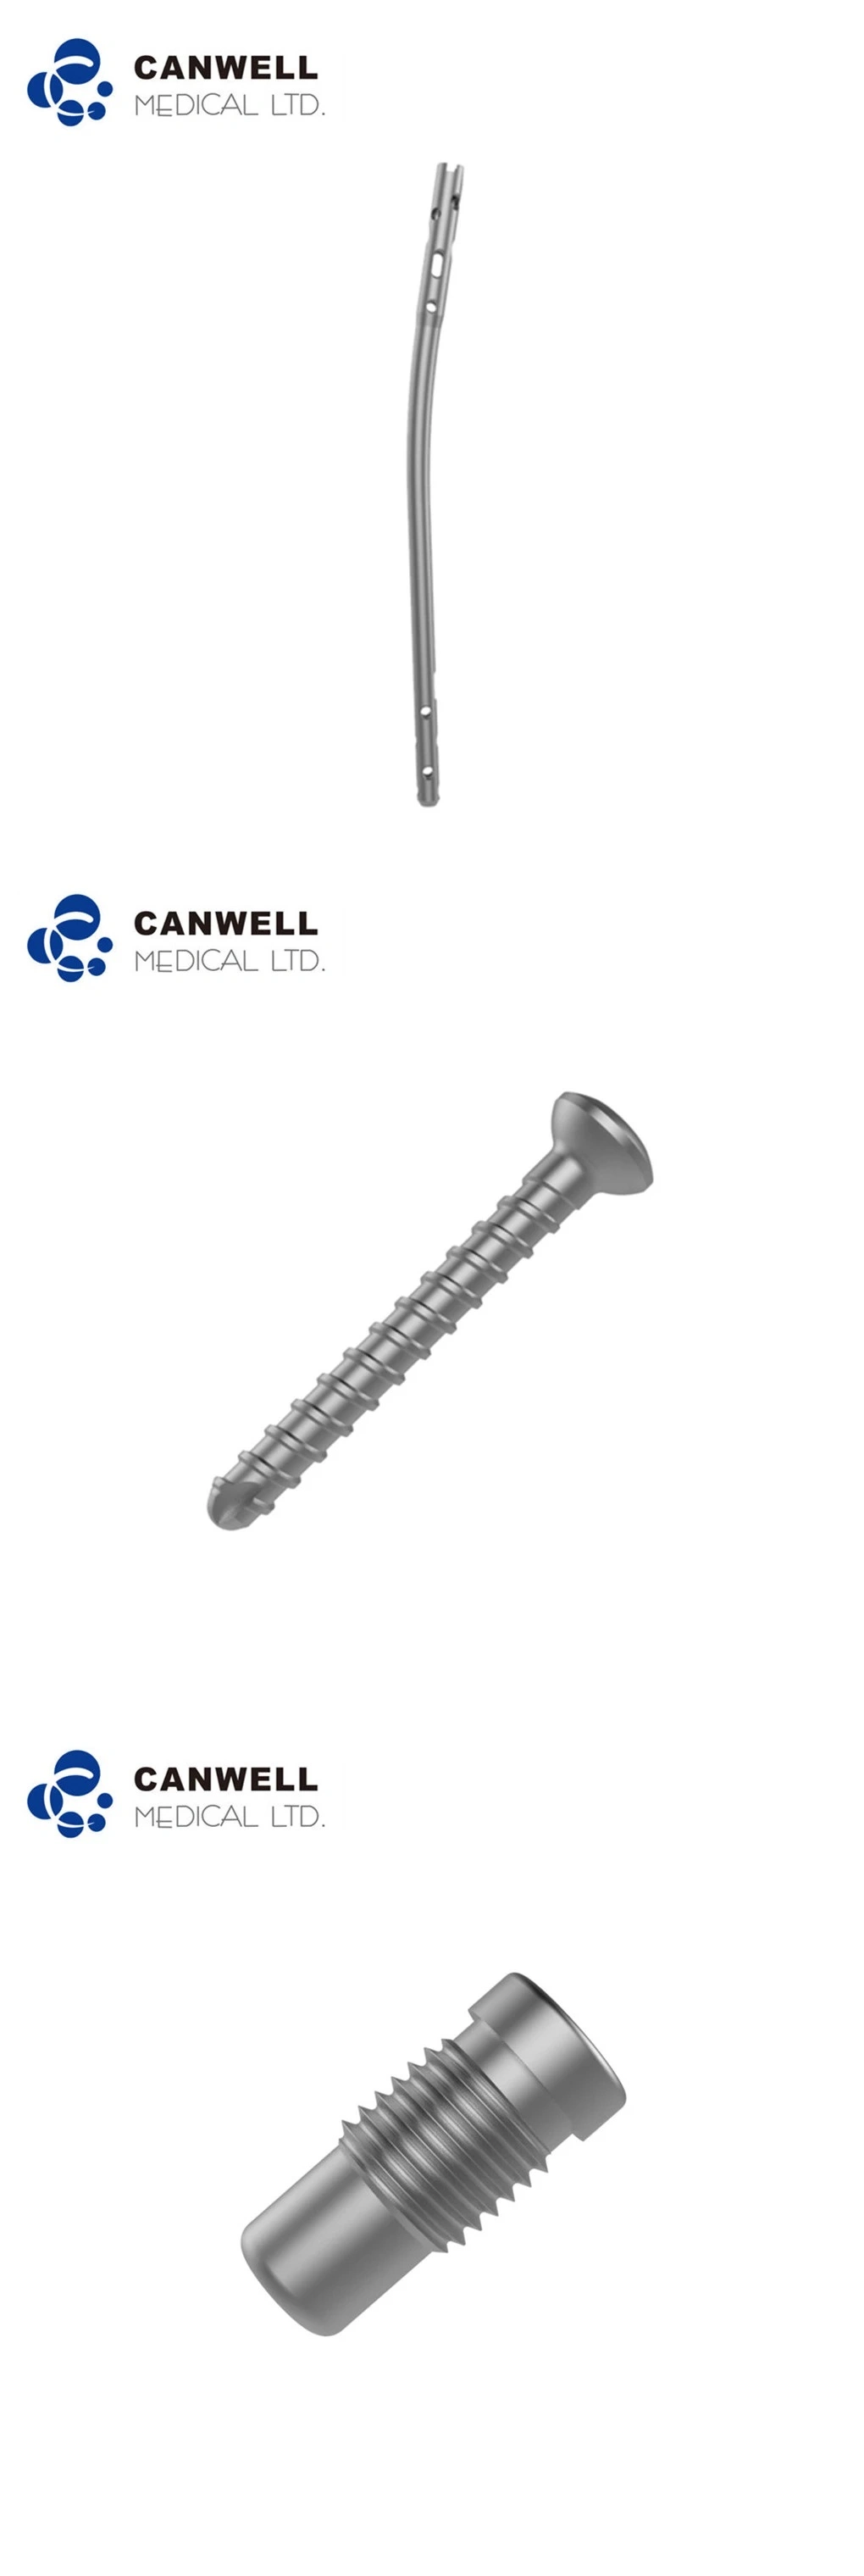 Canwell Medical Canefn Expert Proximal Femoral Nail Instrument Set Intramedullary Nail Instrument Set